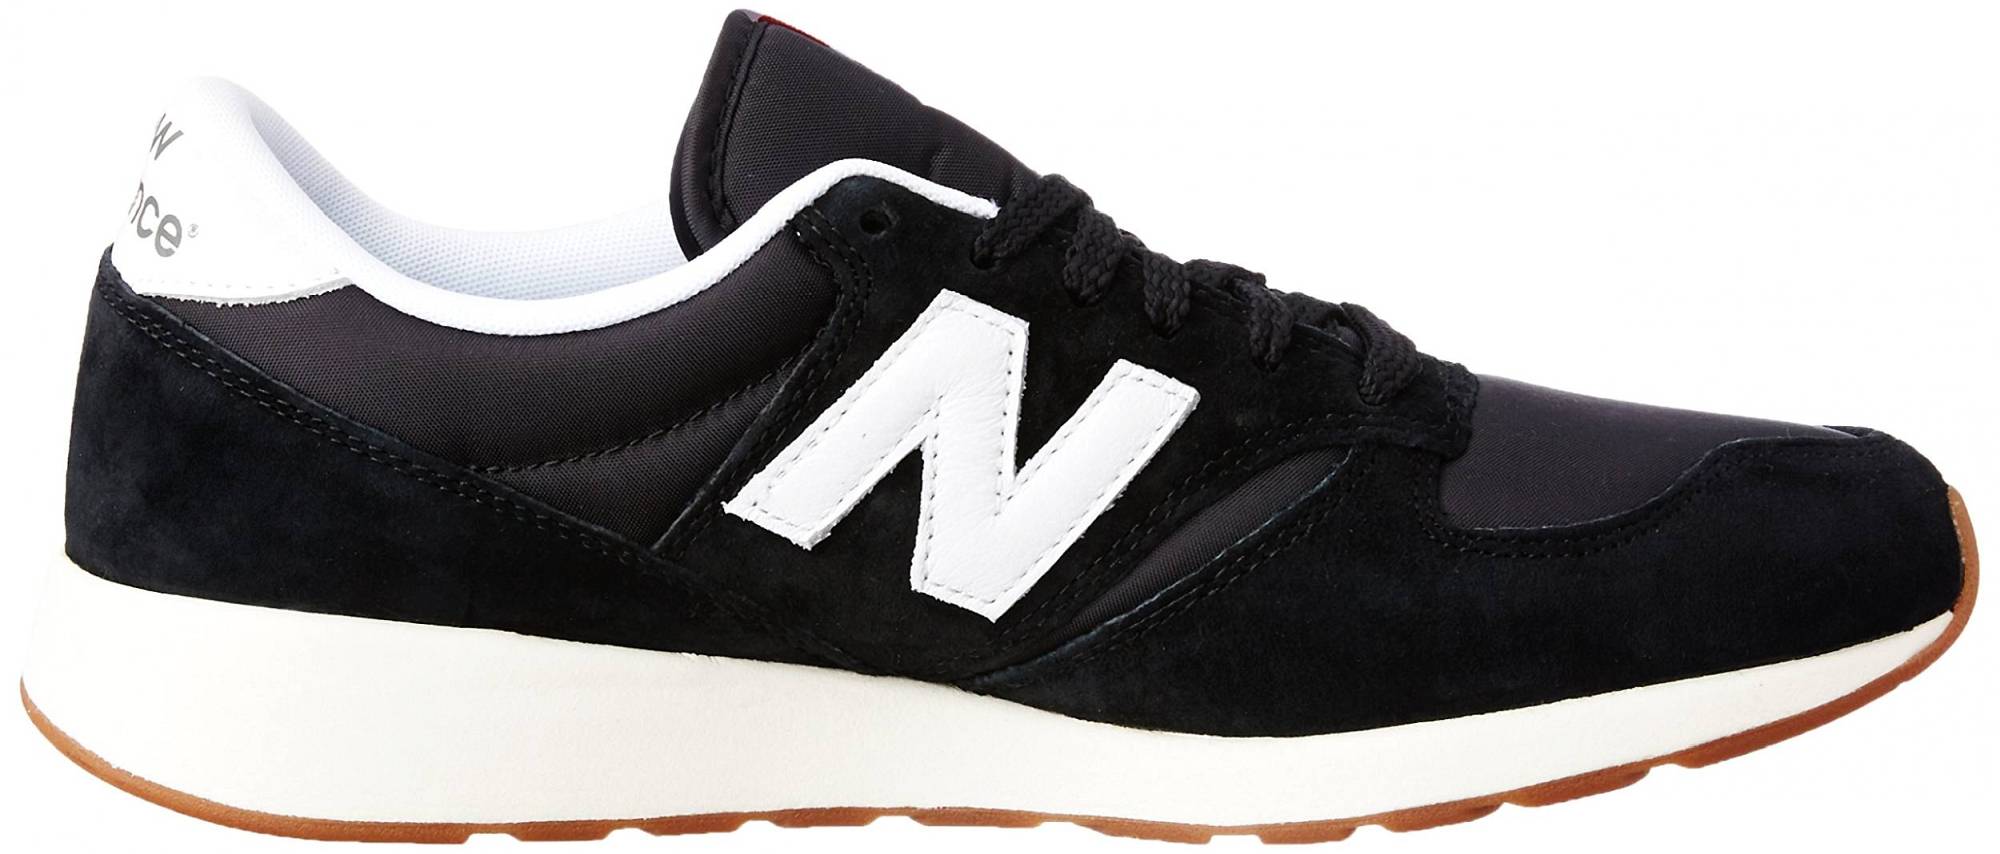 New Balance 420 Re-Engineered Suede – Shoes Reviews & Reasons To Buy